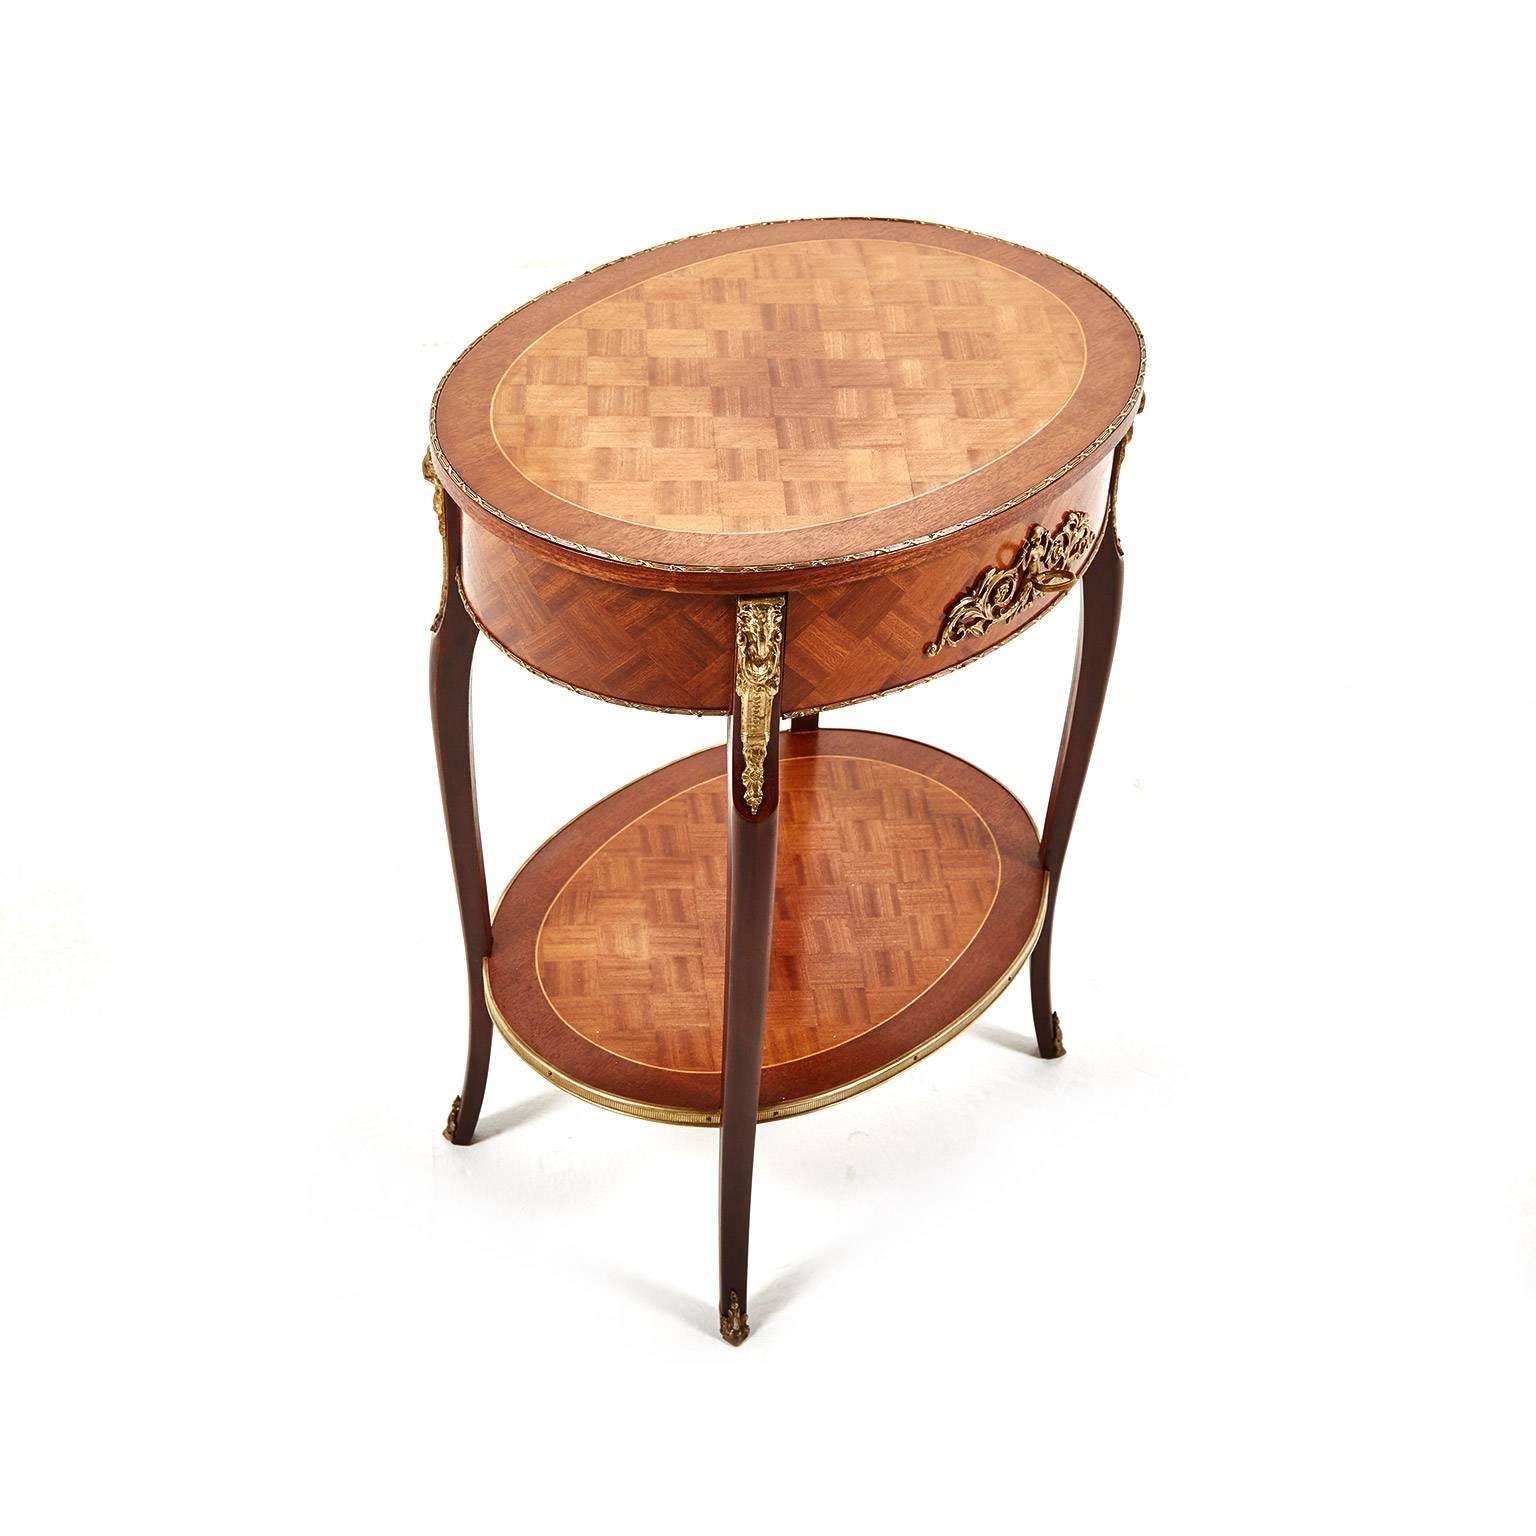 Small Louis XV-style side table, with inlays of marquetry and lovely bronze mounts, 20th century French production.


         